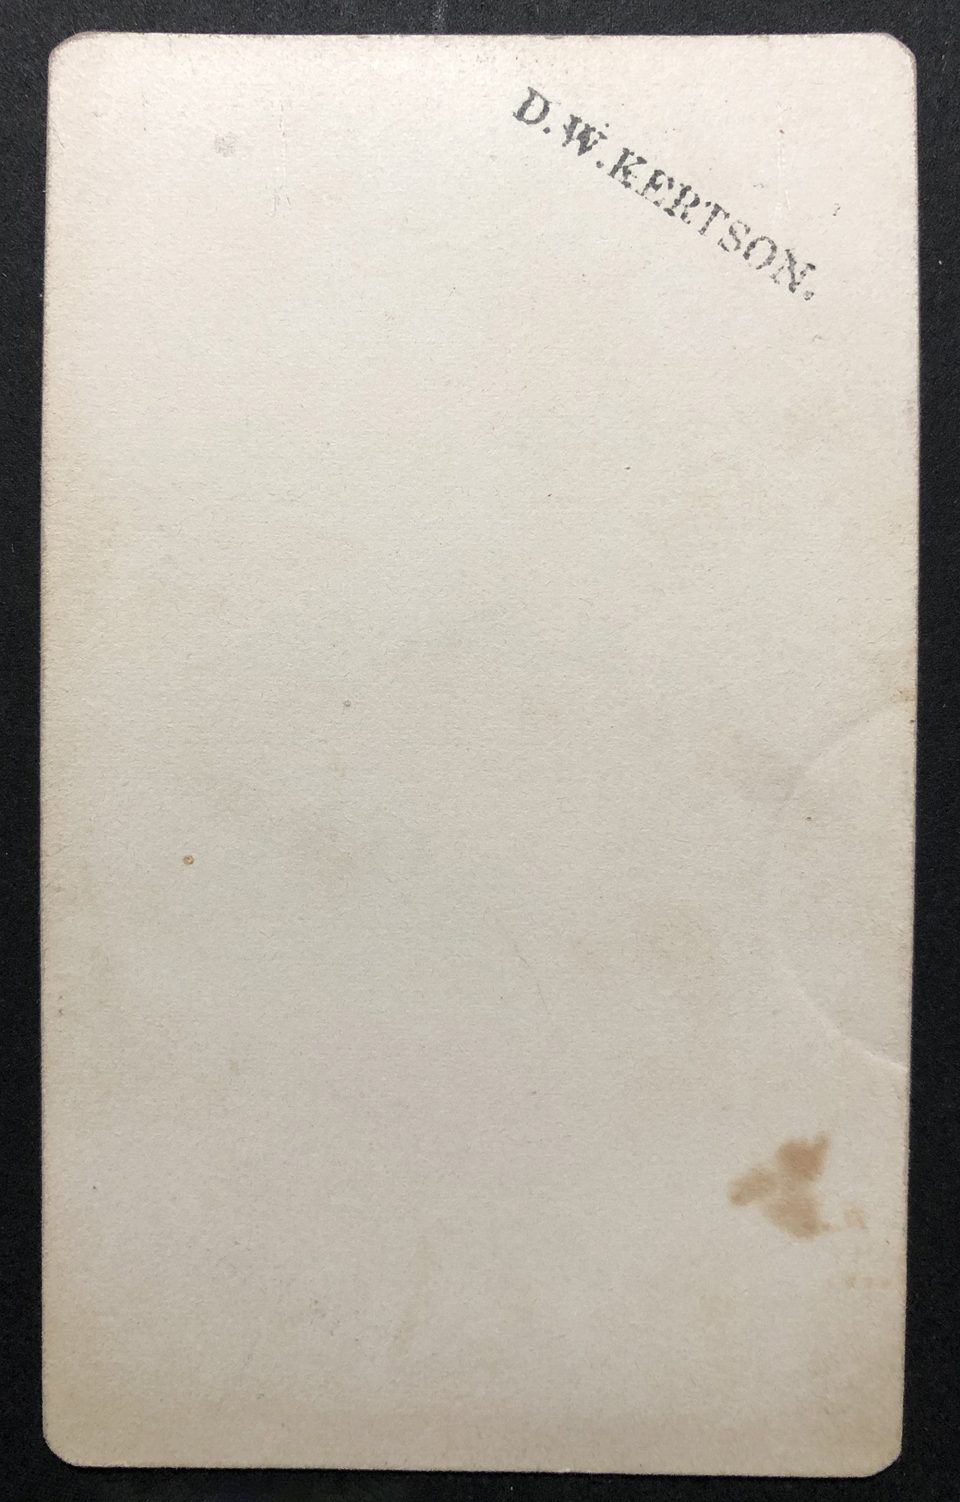 The back side of the D.W. Kertson photograph reveals only a small stamp of his name in black ink.